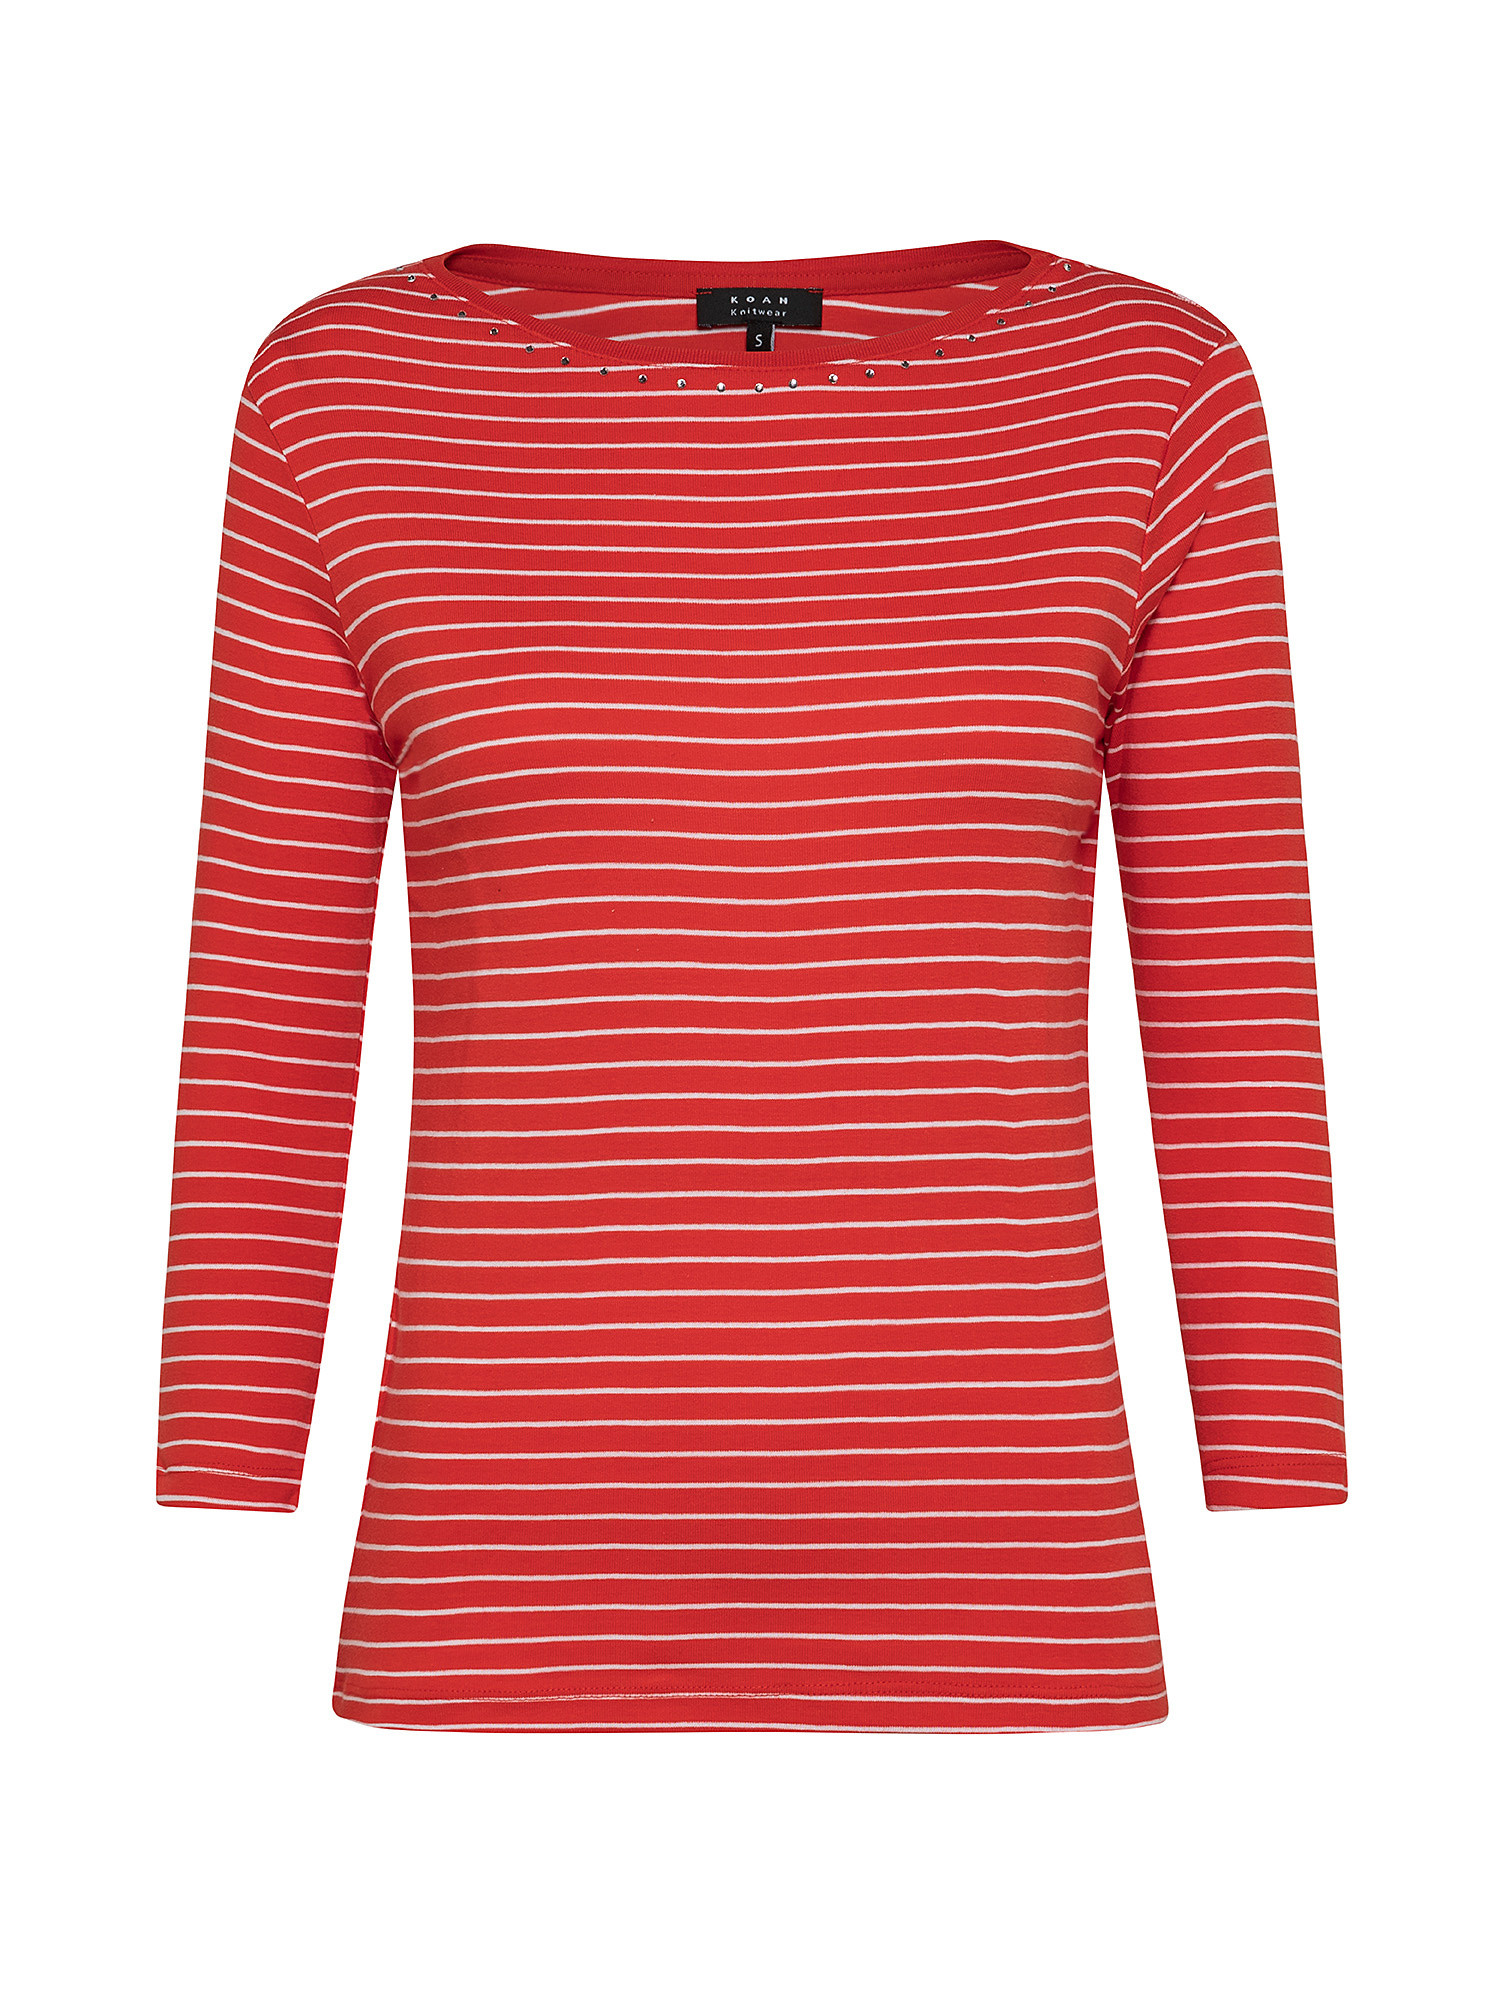 Striped crewneck T-shirt with rhinestones, Red, large image number 0